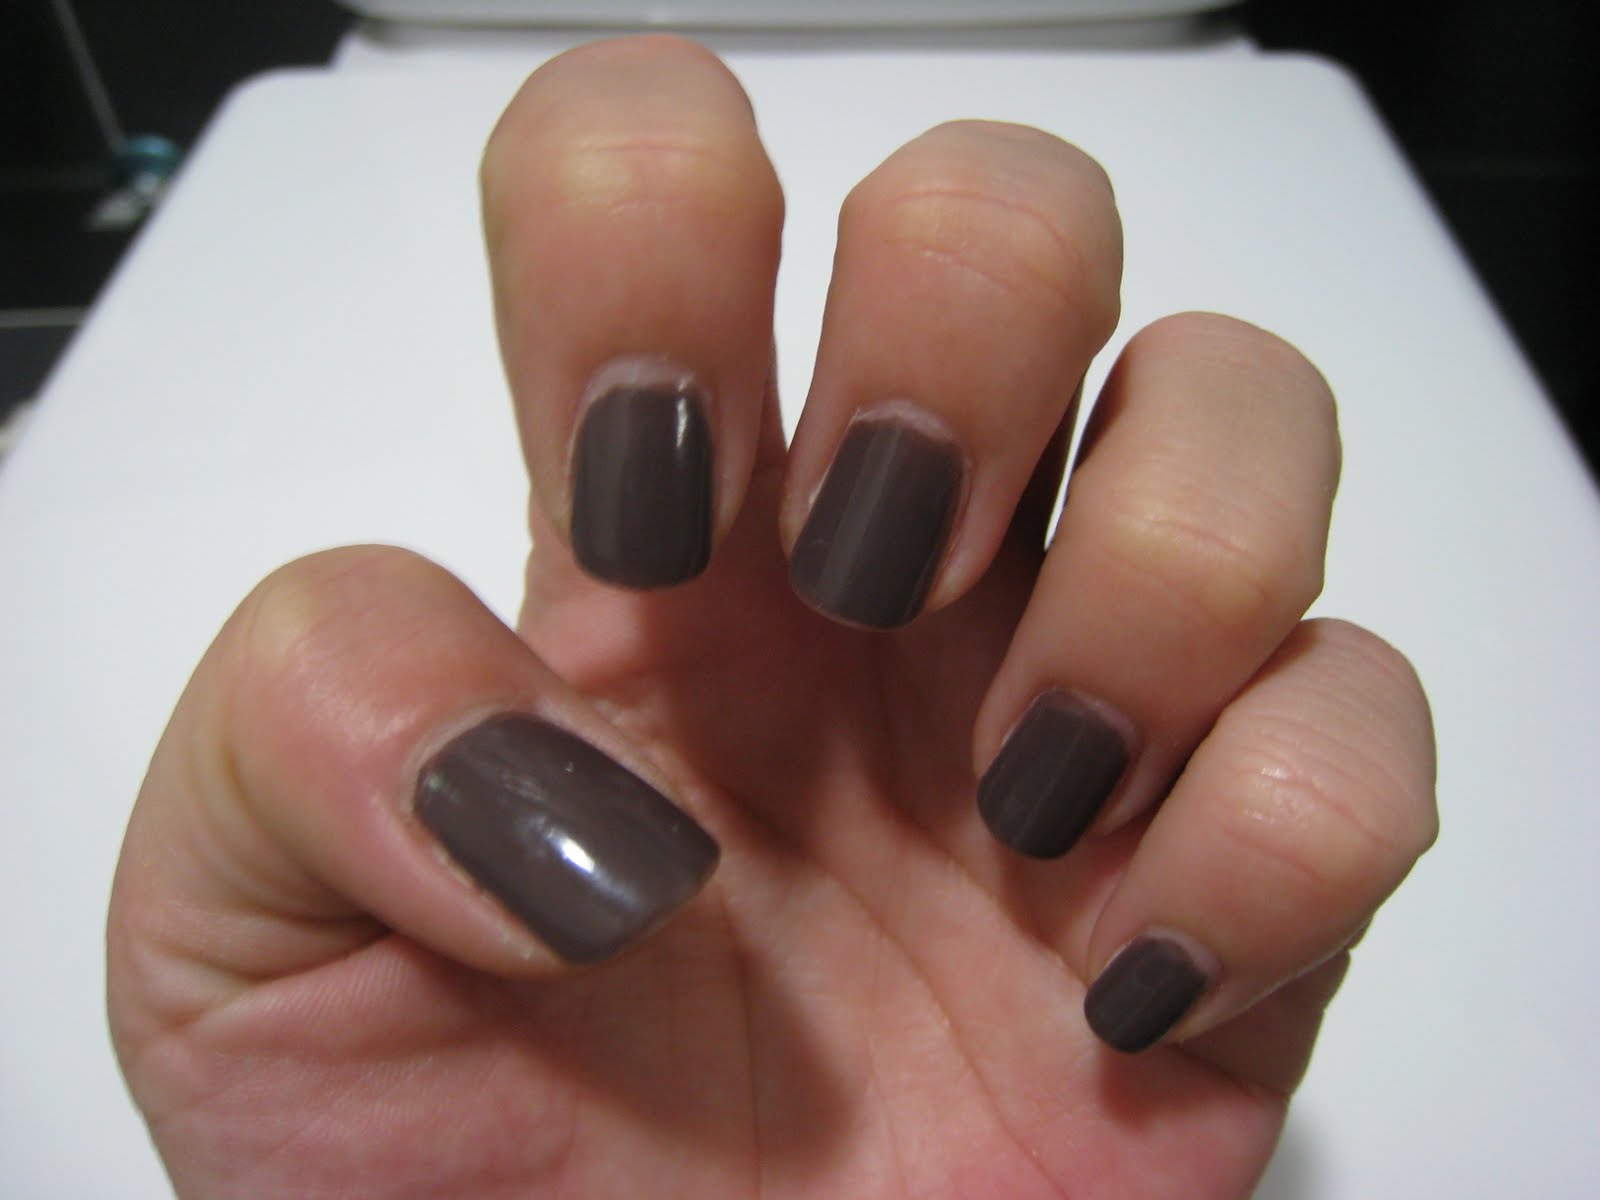 7. OPI Infinite Shine Nail Polish in "You Don't Know Jacques!" - wide 1